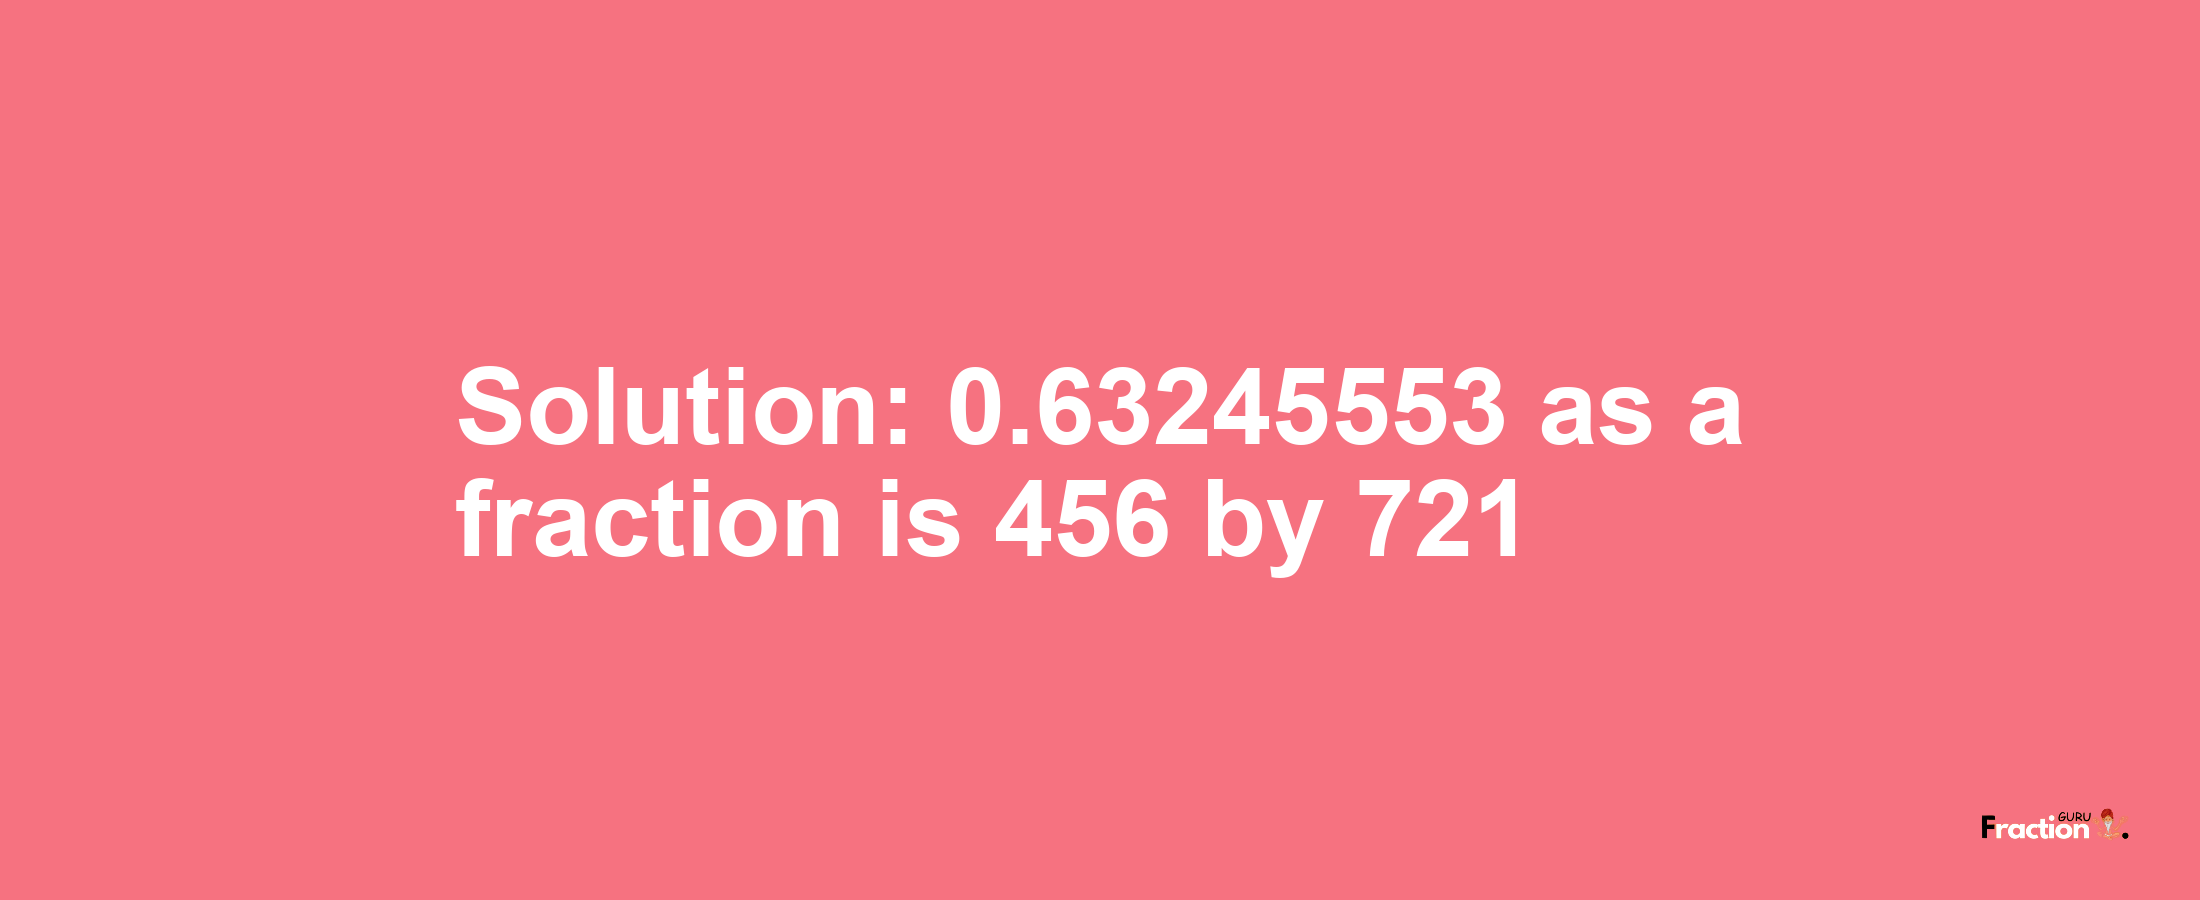 Solution:0.63245553 as a fraction is 456/721